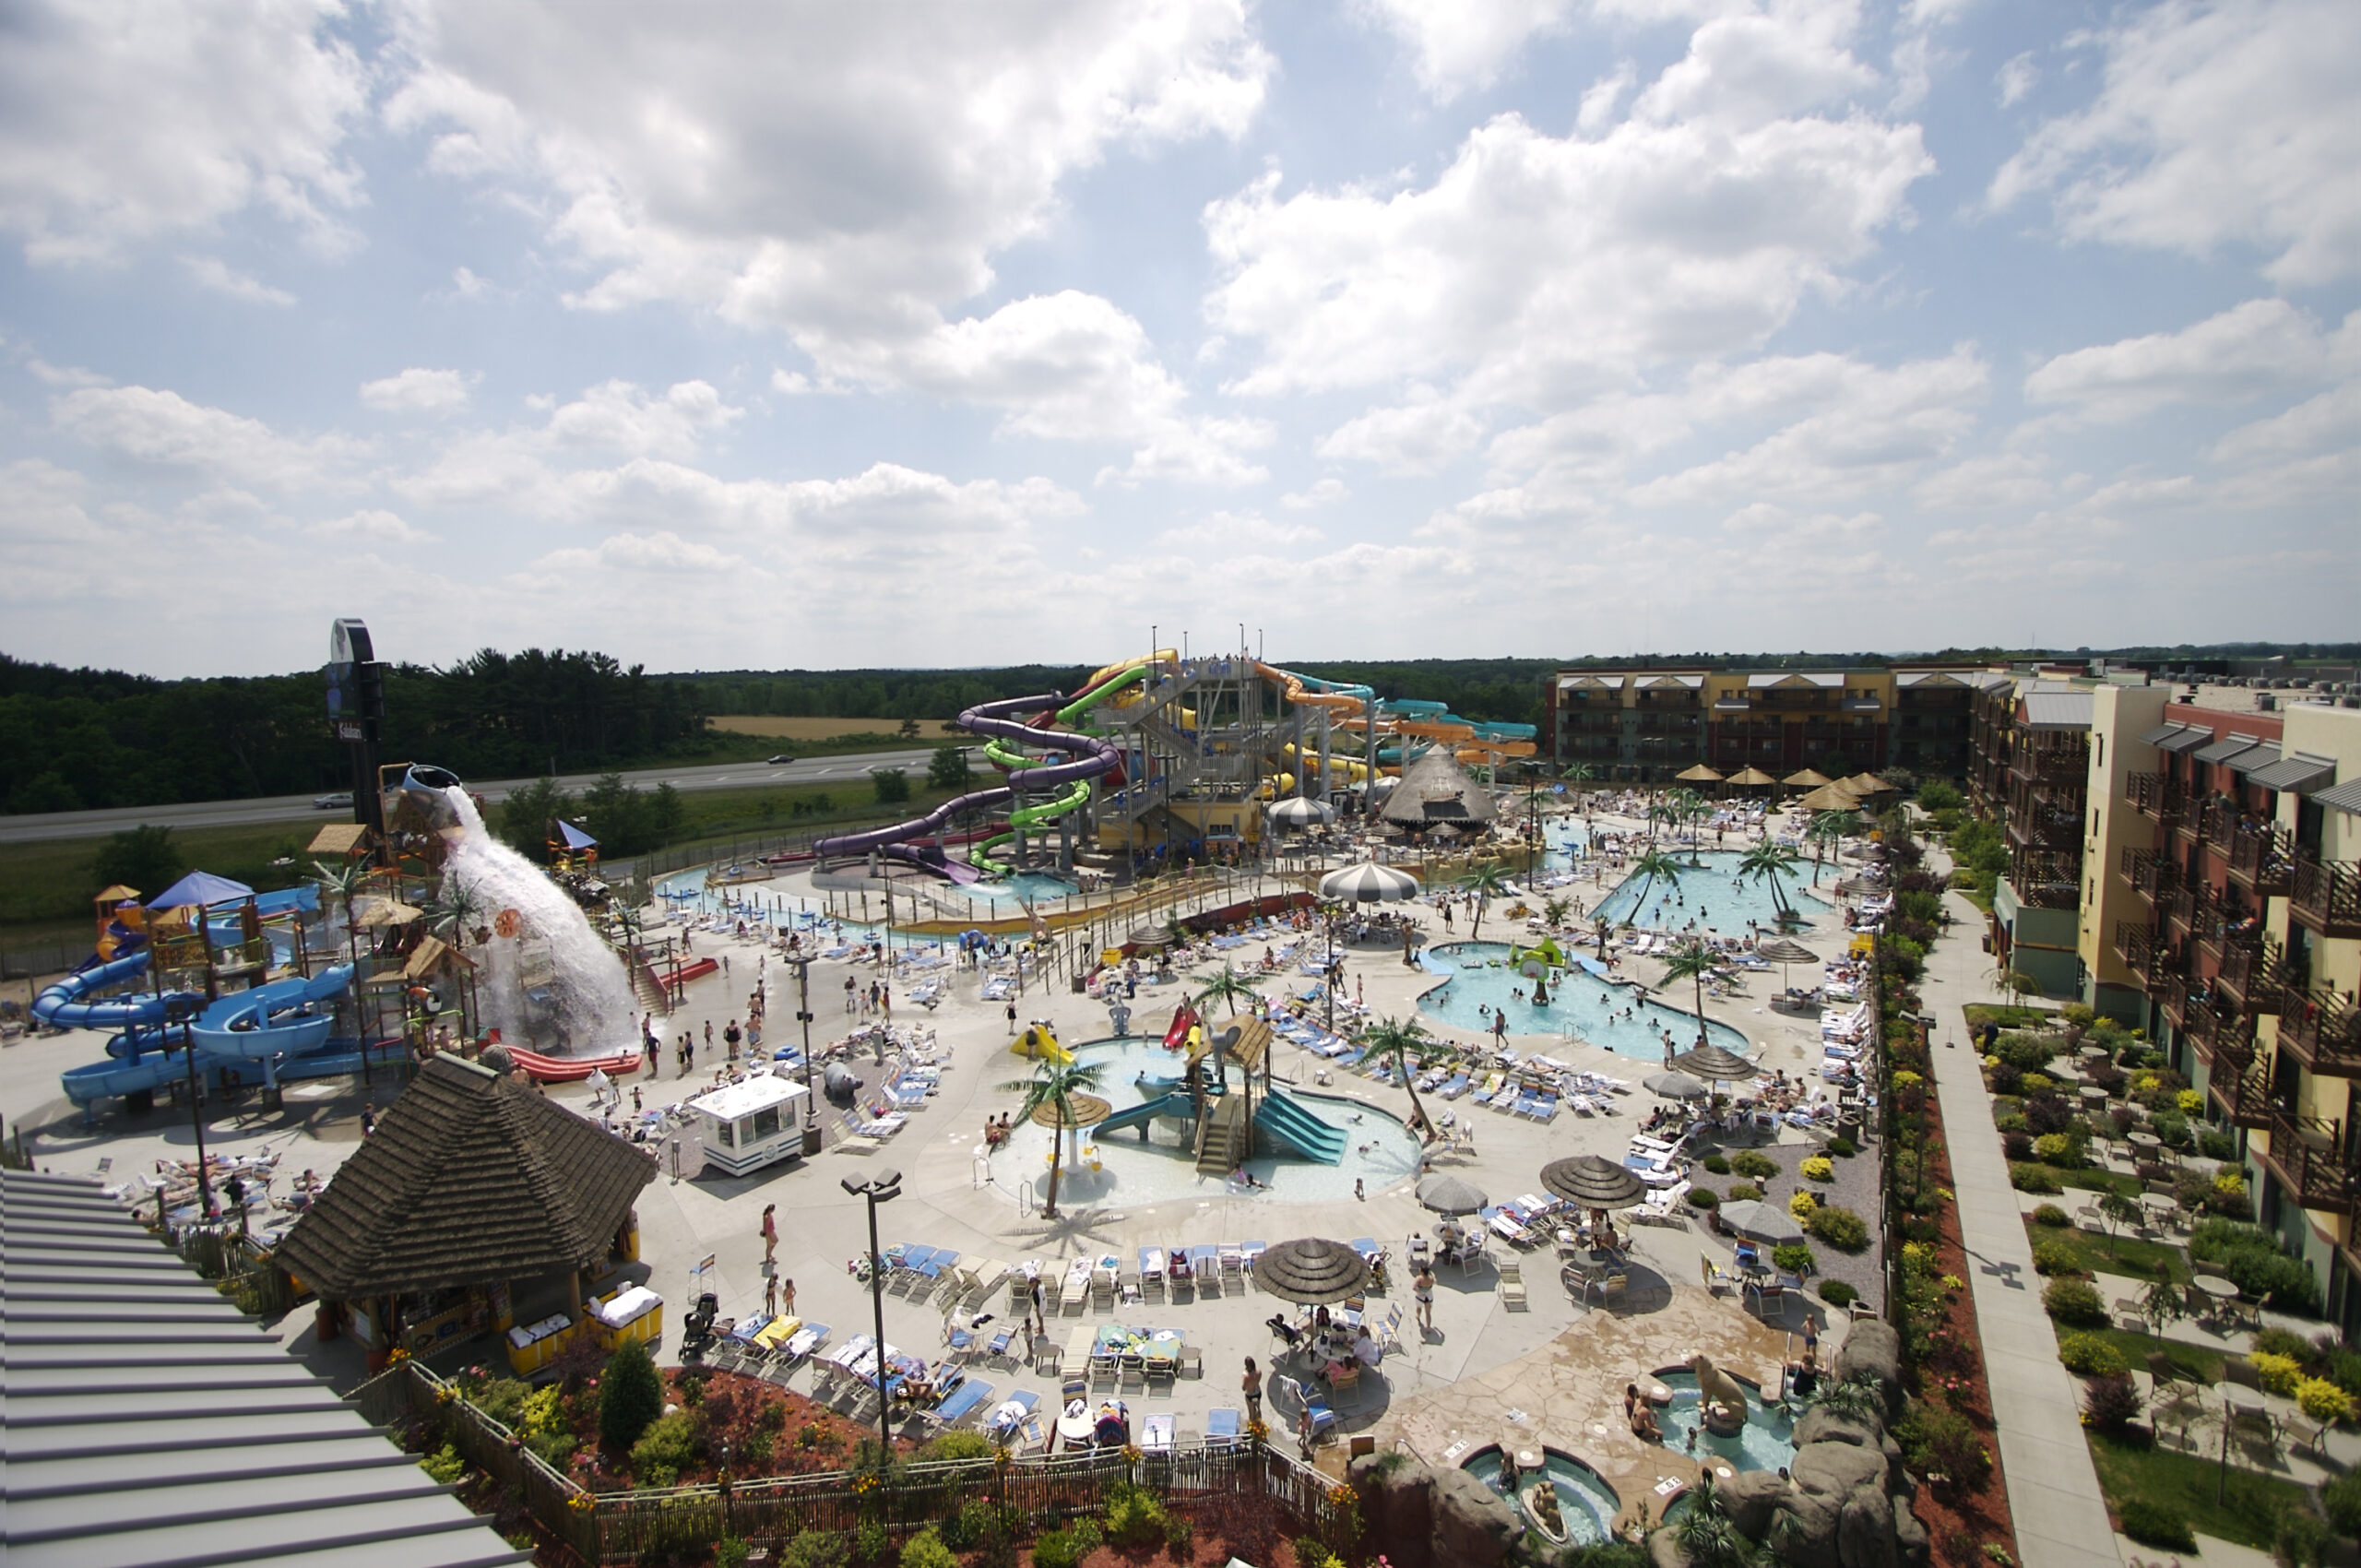 Overview of the Kalahari waterpark in the Wisconsin Dells